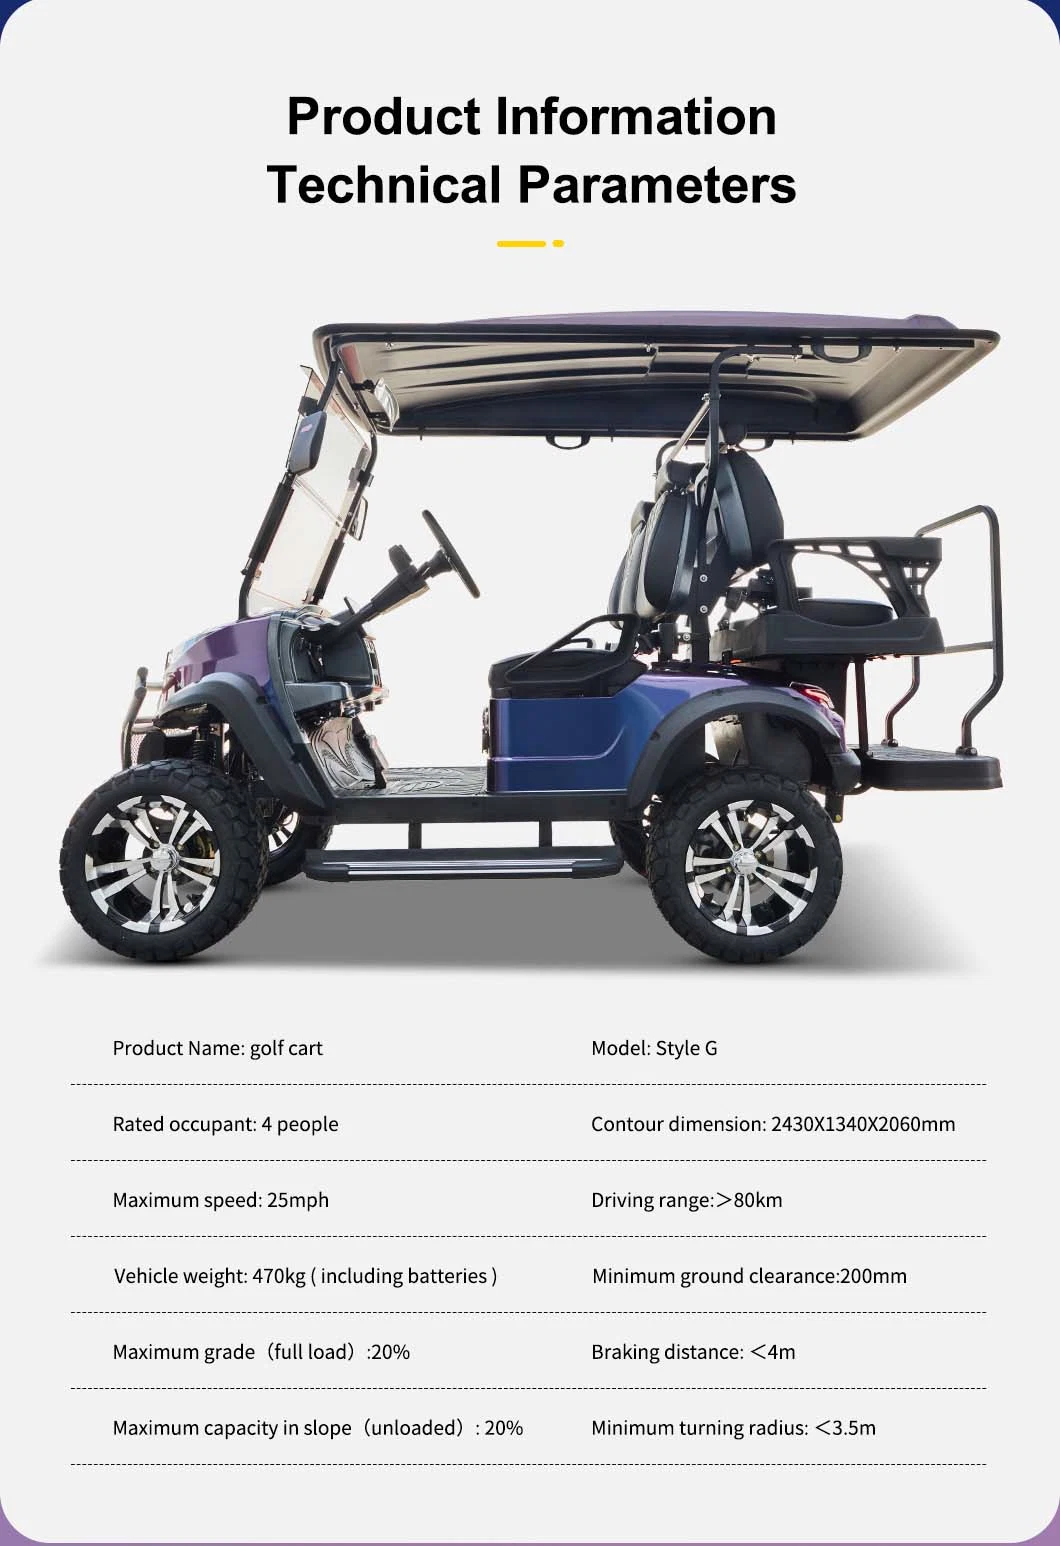 2023 New Modle Style G for Exclusive Right 4 Seat Sightseeing Bus Club Cart Electric Vehicle Golf Buggy Hunting Cart